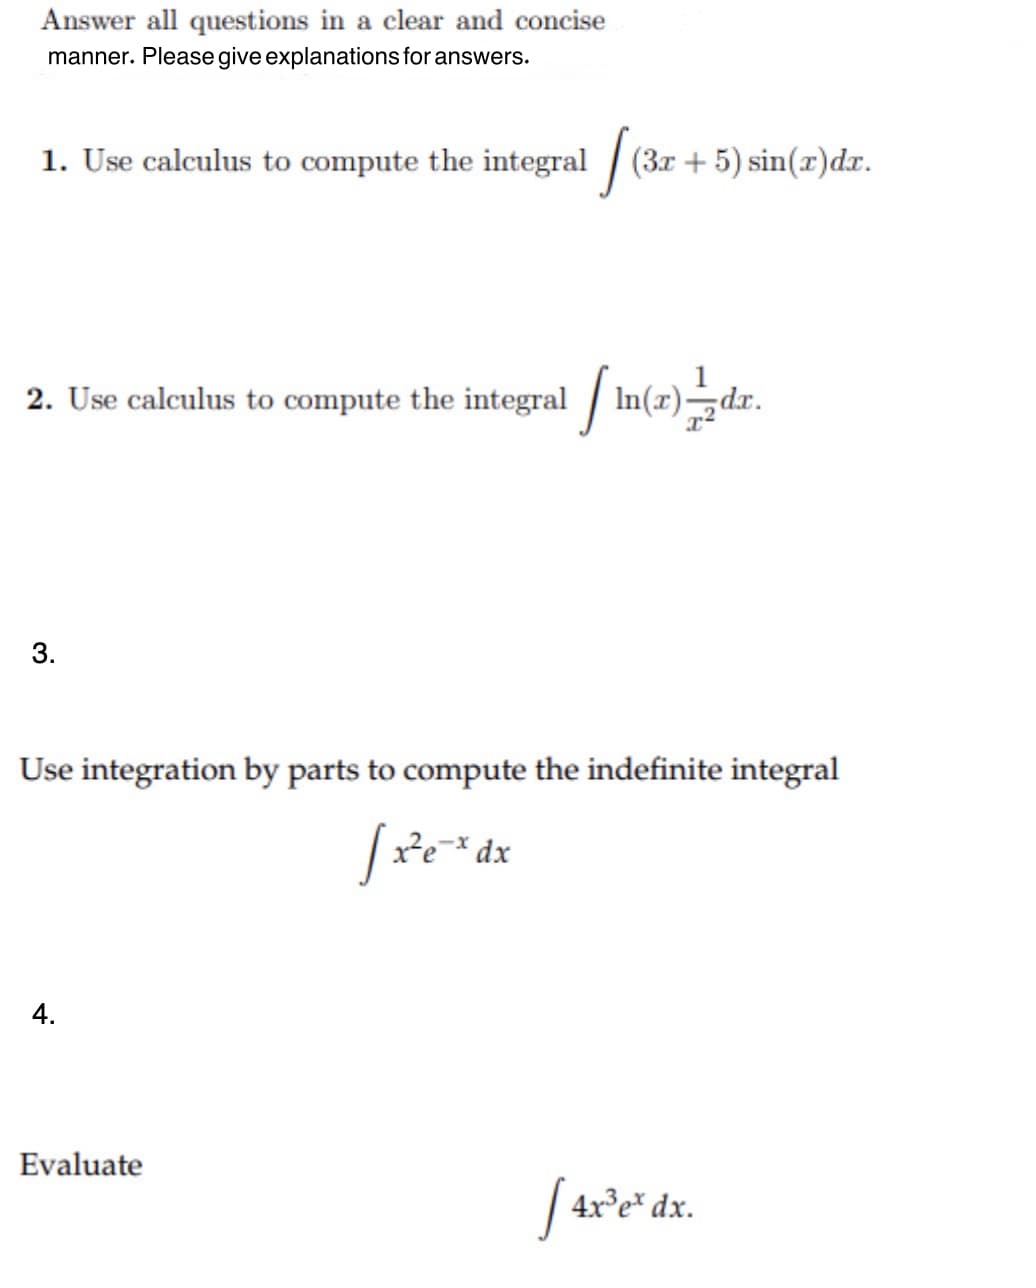 Answer all questions in a clear and concise
manner. Please give explanations for answers.
1. Use calculus to compute the integral / (3r + 5) sin(x)dr.
2. Use calculus to compute the integral / In(x)¬dxr.
3.
Use integration by parts to compute the indefinite integral
-× dx
4.
Evaluate
4x°e* dx.
